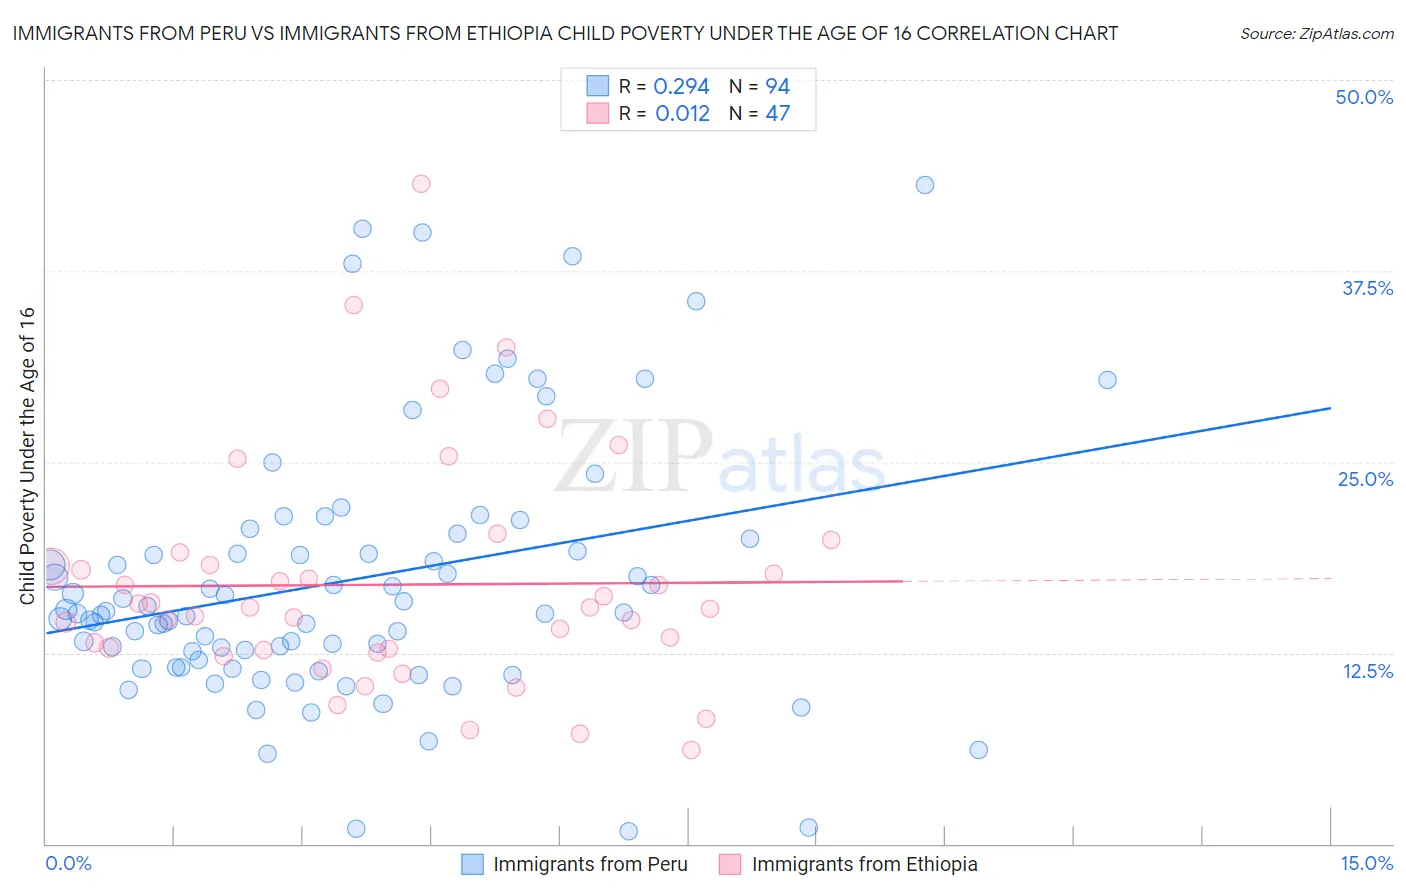 Immigrants from Peru vs Immigrants from Ethiopia Child Poverty Under the Age of 16